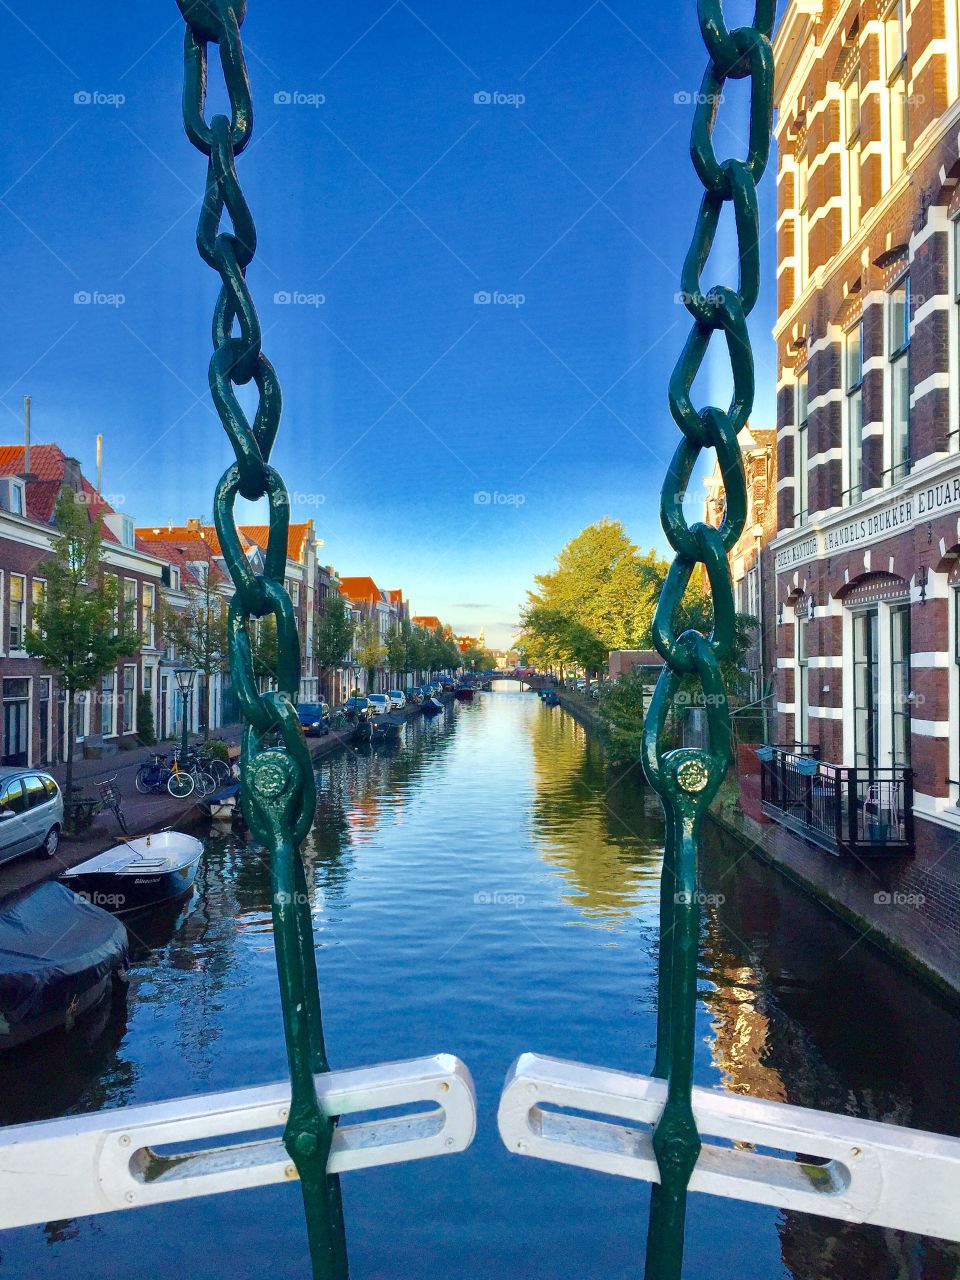 Lovely European canals 